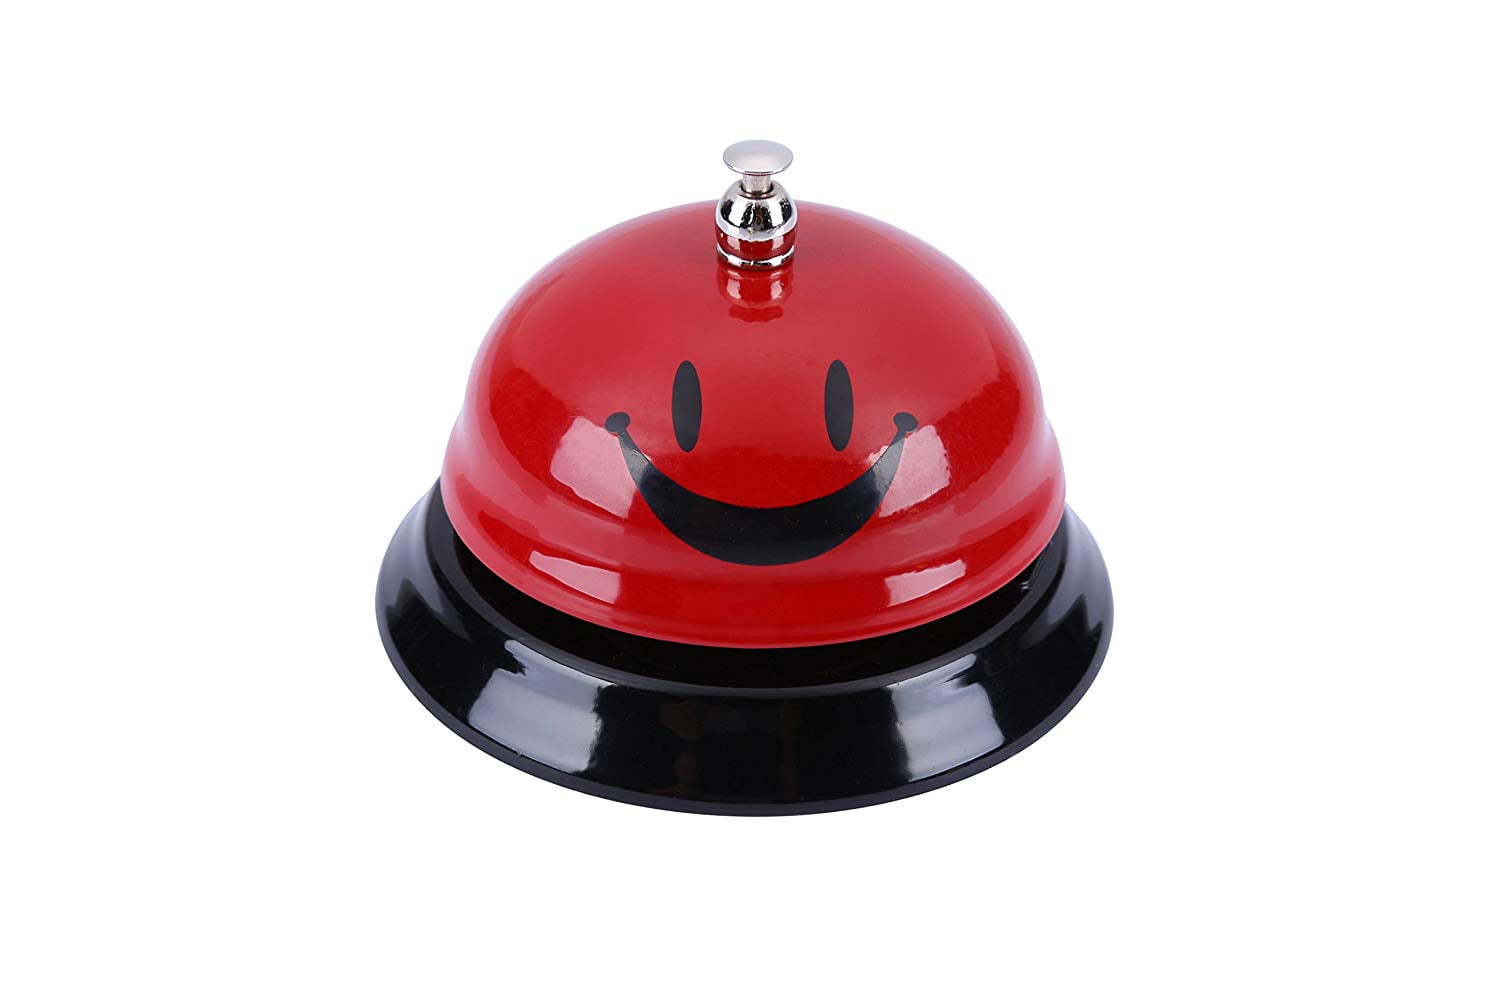 2 Pieces Ring for A Kiss Call Bell Hand Bell Service Bell Bar Counter Top Service Call Bell Ring Reception Bell Service Bell Wedding Events Bell Party Events Bell Anniversary Gifts for Couple